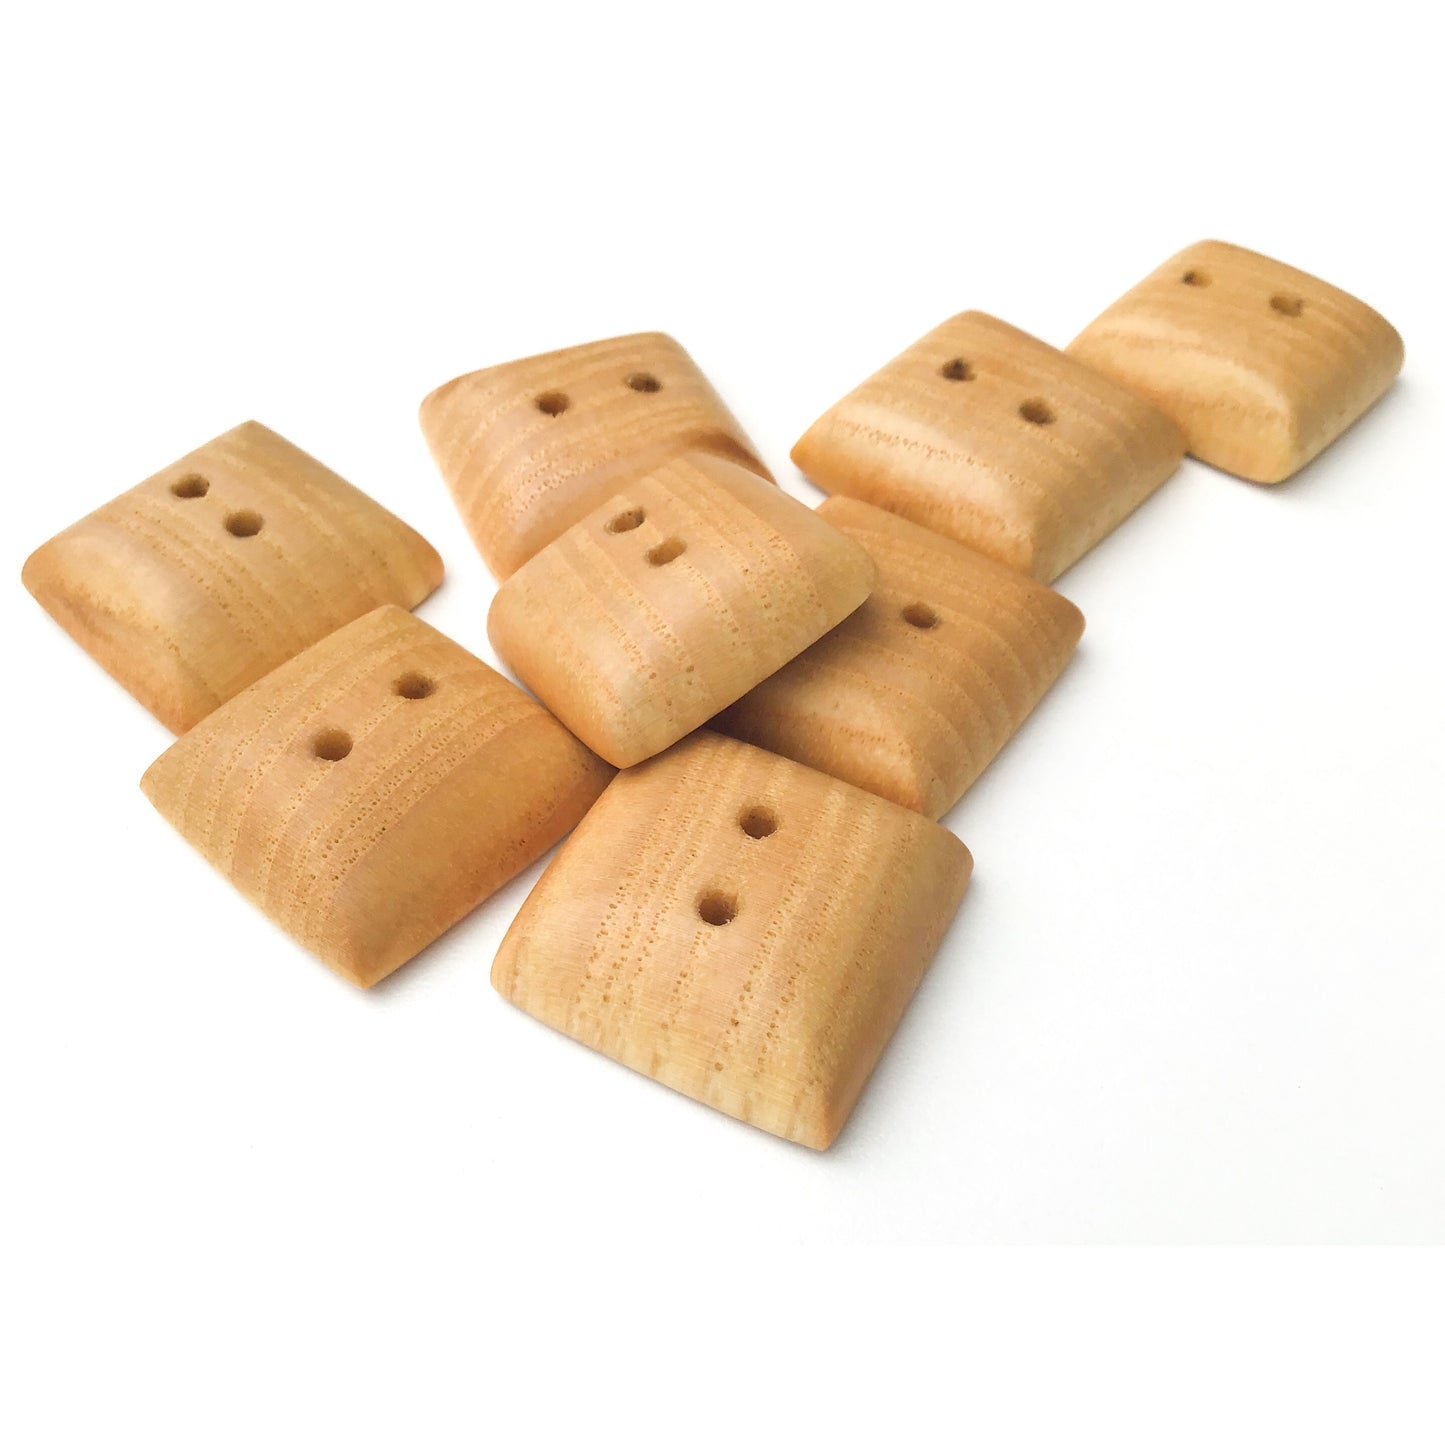 Large Maple Wood Buttons - Square Maple Buttons - 1"